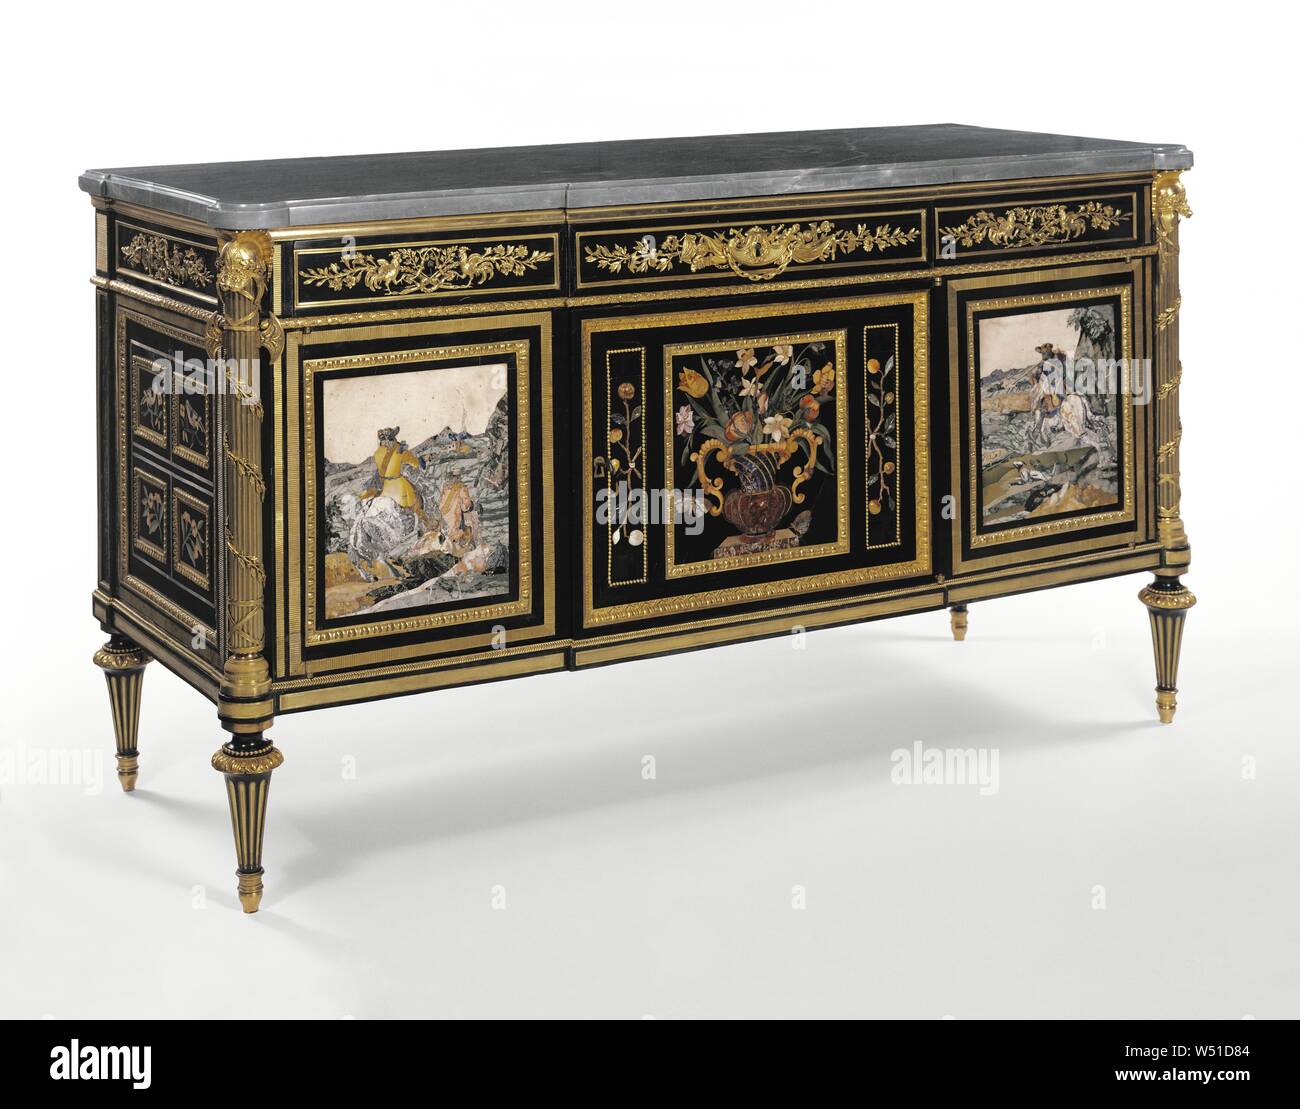 Cabinet, Case by Guillaume Benneman (French, died 1811), Gilt-bronze mounts after models by Gilles-François Martin (French, about 1713 - 1795), Mounts cast by Etienne-Jean Forestier (French (master 1764)), Mounts cast by Denis Bardin (French, active 1775 - 1799 (master 1778)), Mounts chased by Pierre-Philippe Thomire (French, 1751 - 1843 (master 1772)), Mounts gilt by Claude Galle (French, 1759 - 1815 (master 1786)), Paris, France, 1788, pietra dura plaque late 17th - 18th century, Oak veneered with ebony, mahogany, and lacquer, set with pietra dura plaques, gilt bronze mounts, bleu turquin Stock Photo